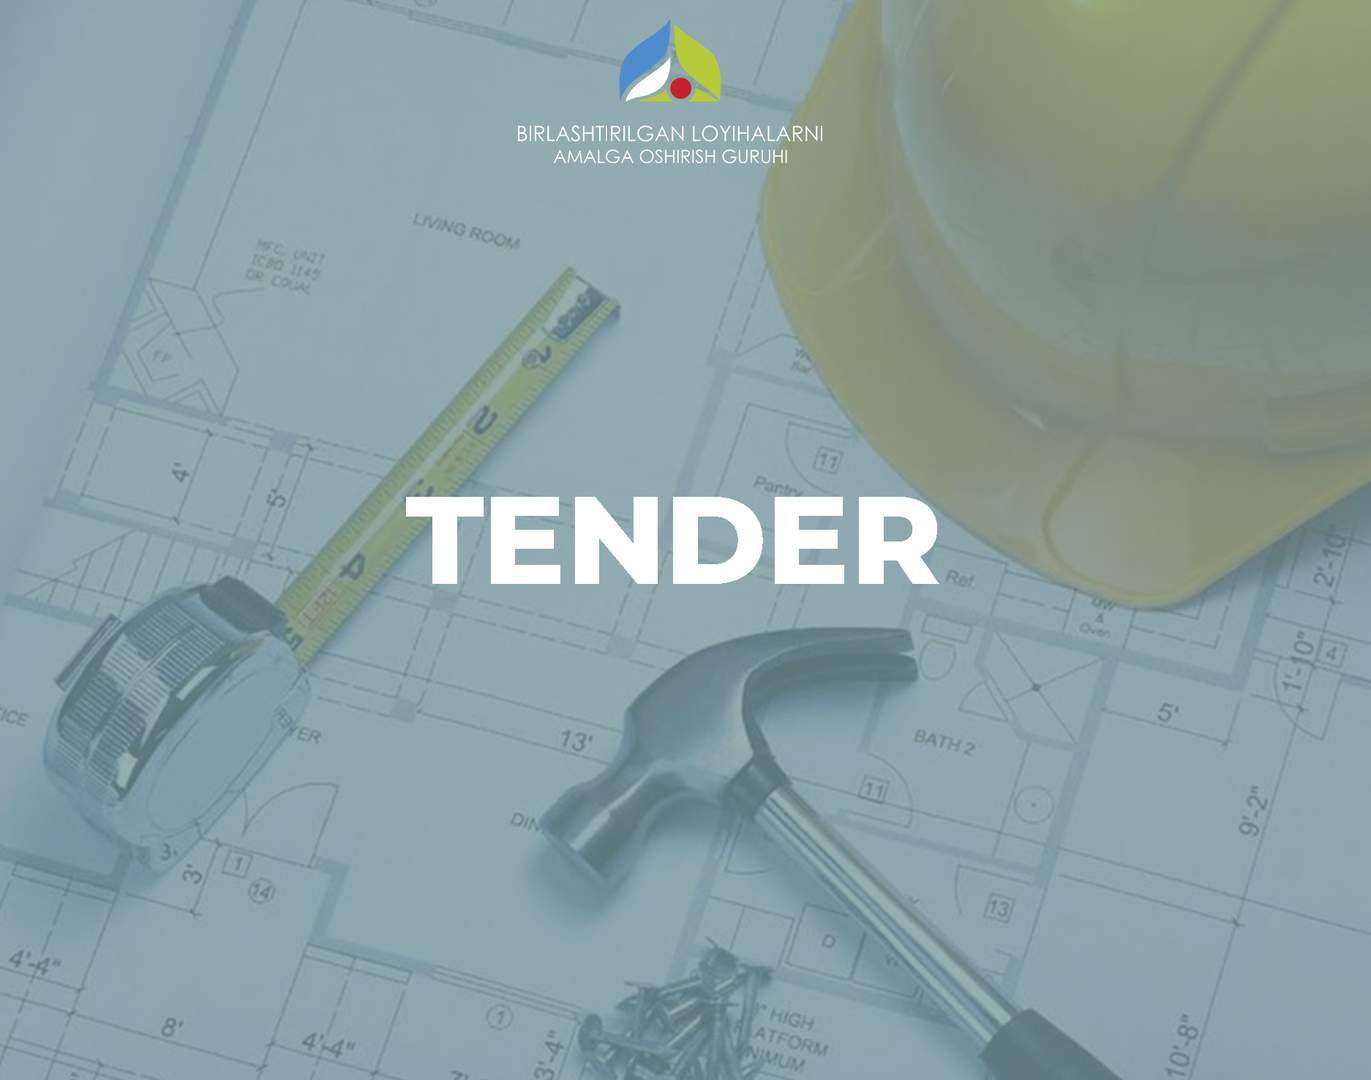 Tender for the execution of design and survey work for the implementation of the “Rural infrastructureDevelopment Project”